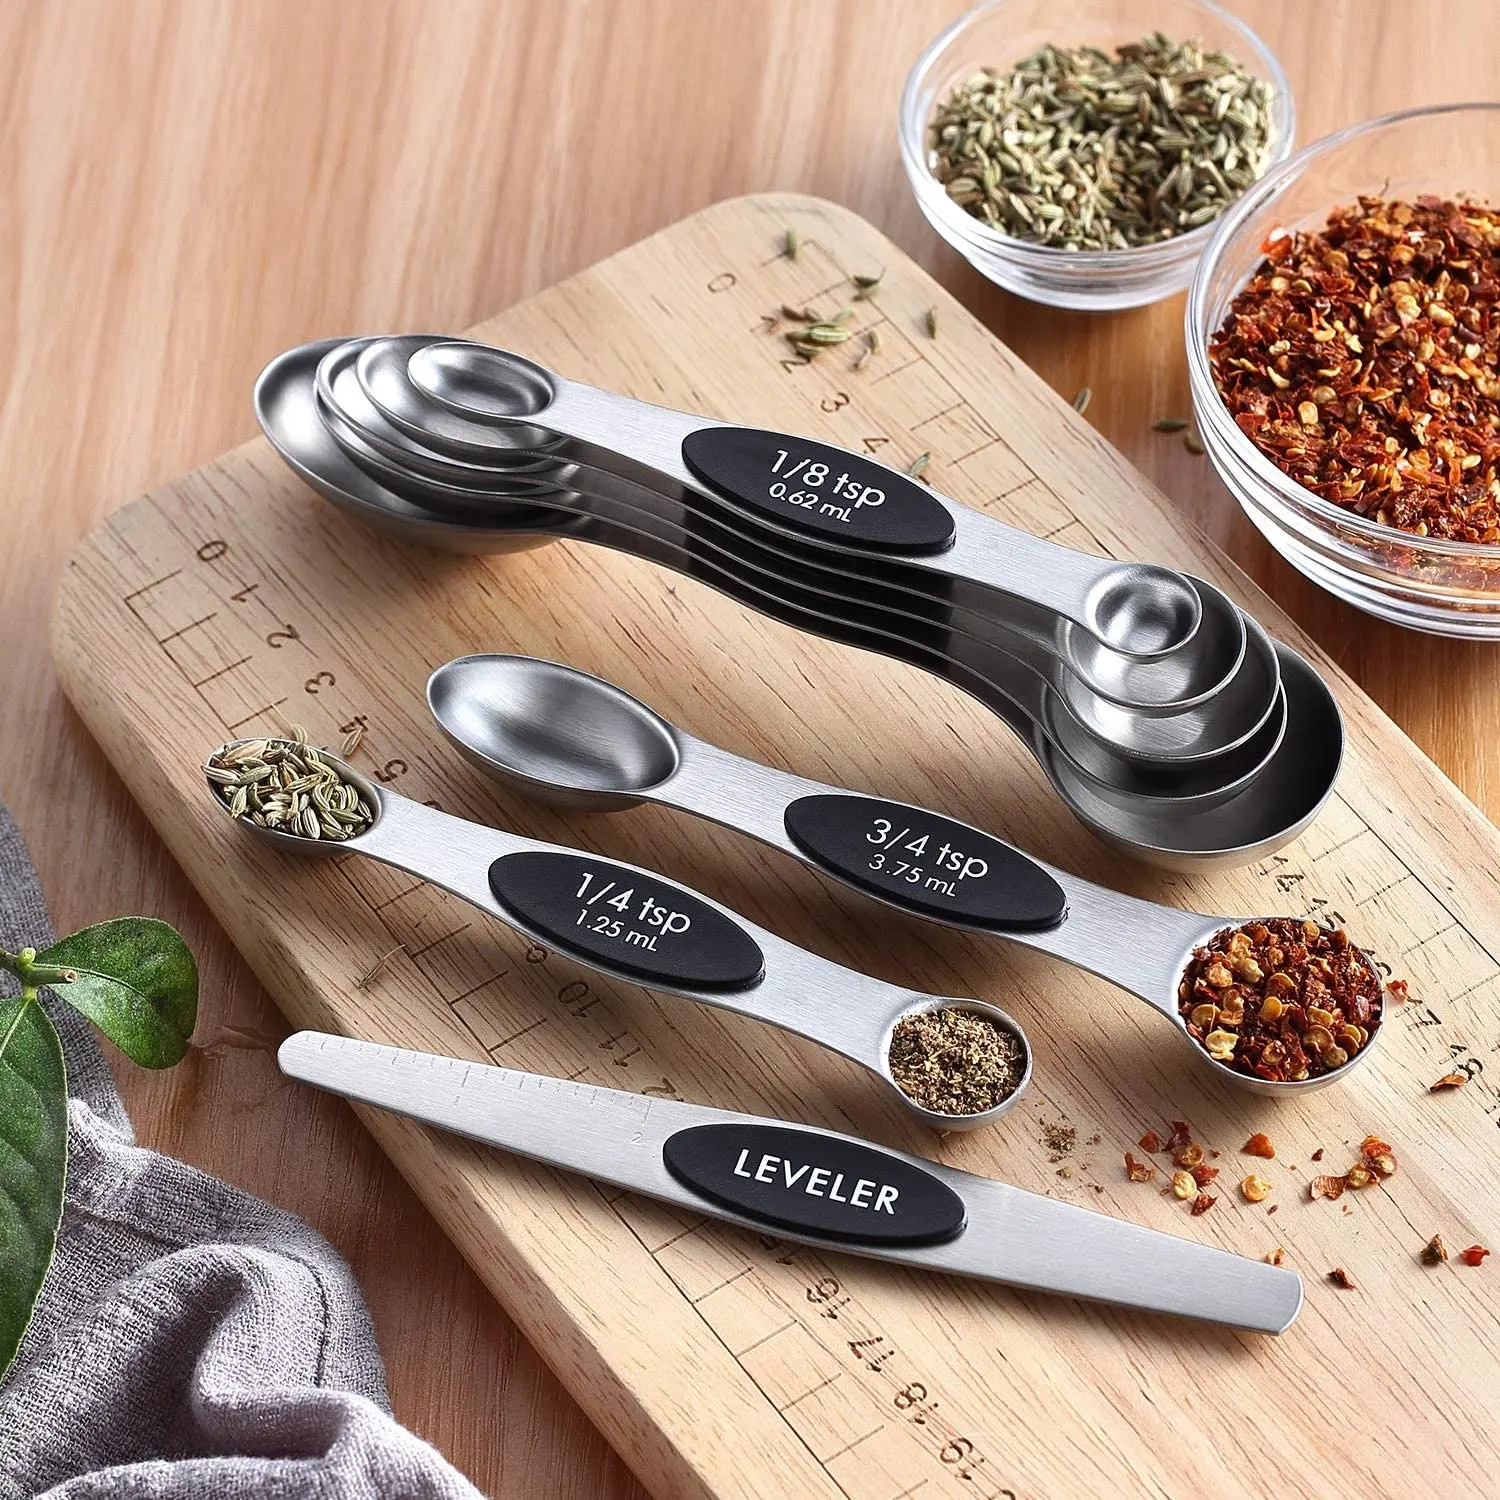 10 Piece Measuring Cups und Spoons Set Premium Stainless Steel Measuring Cups